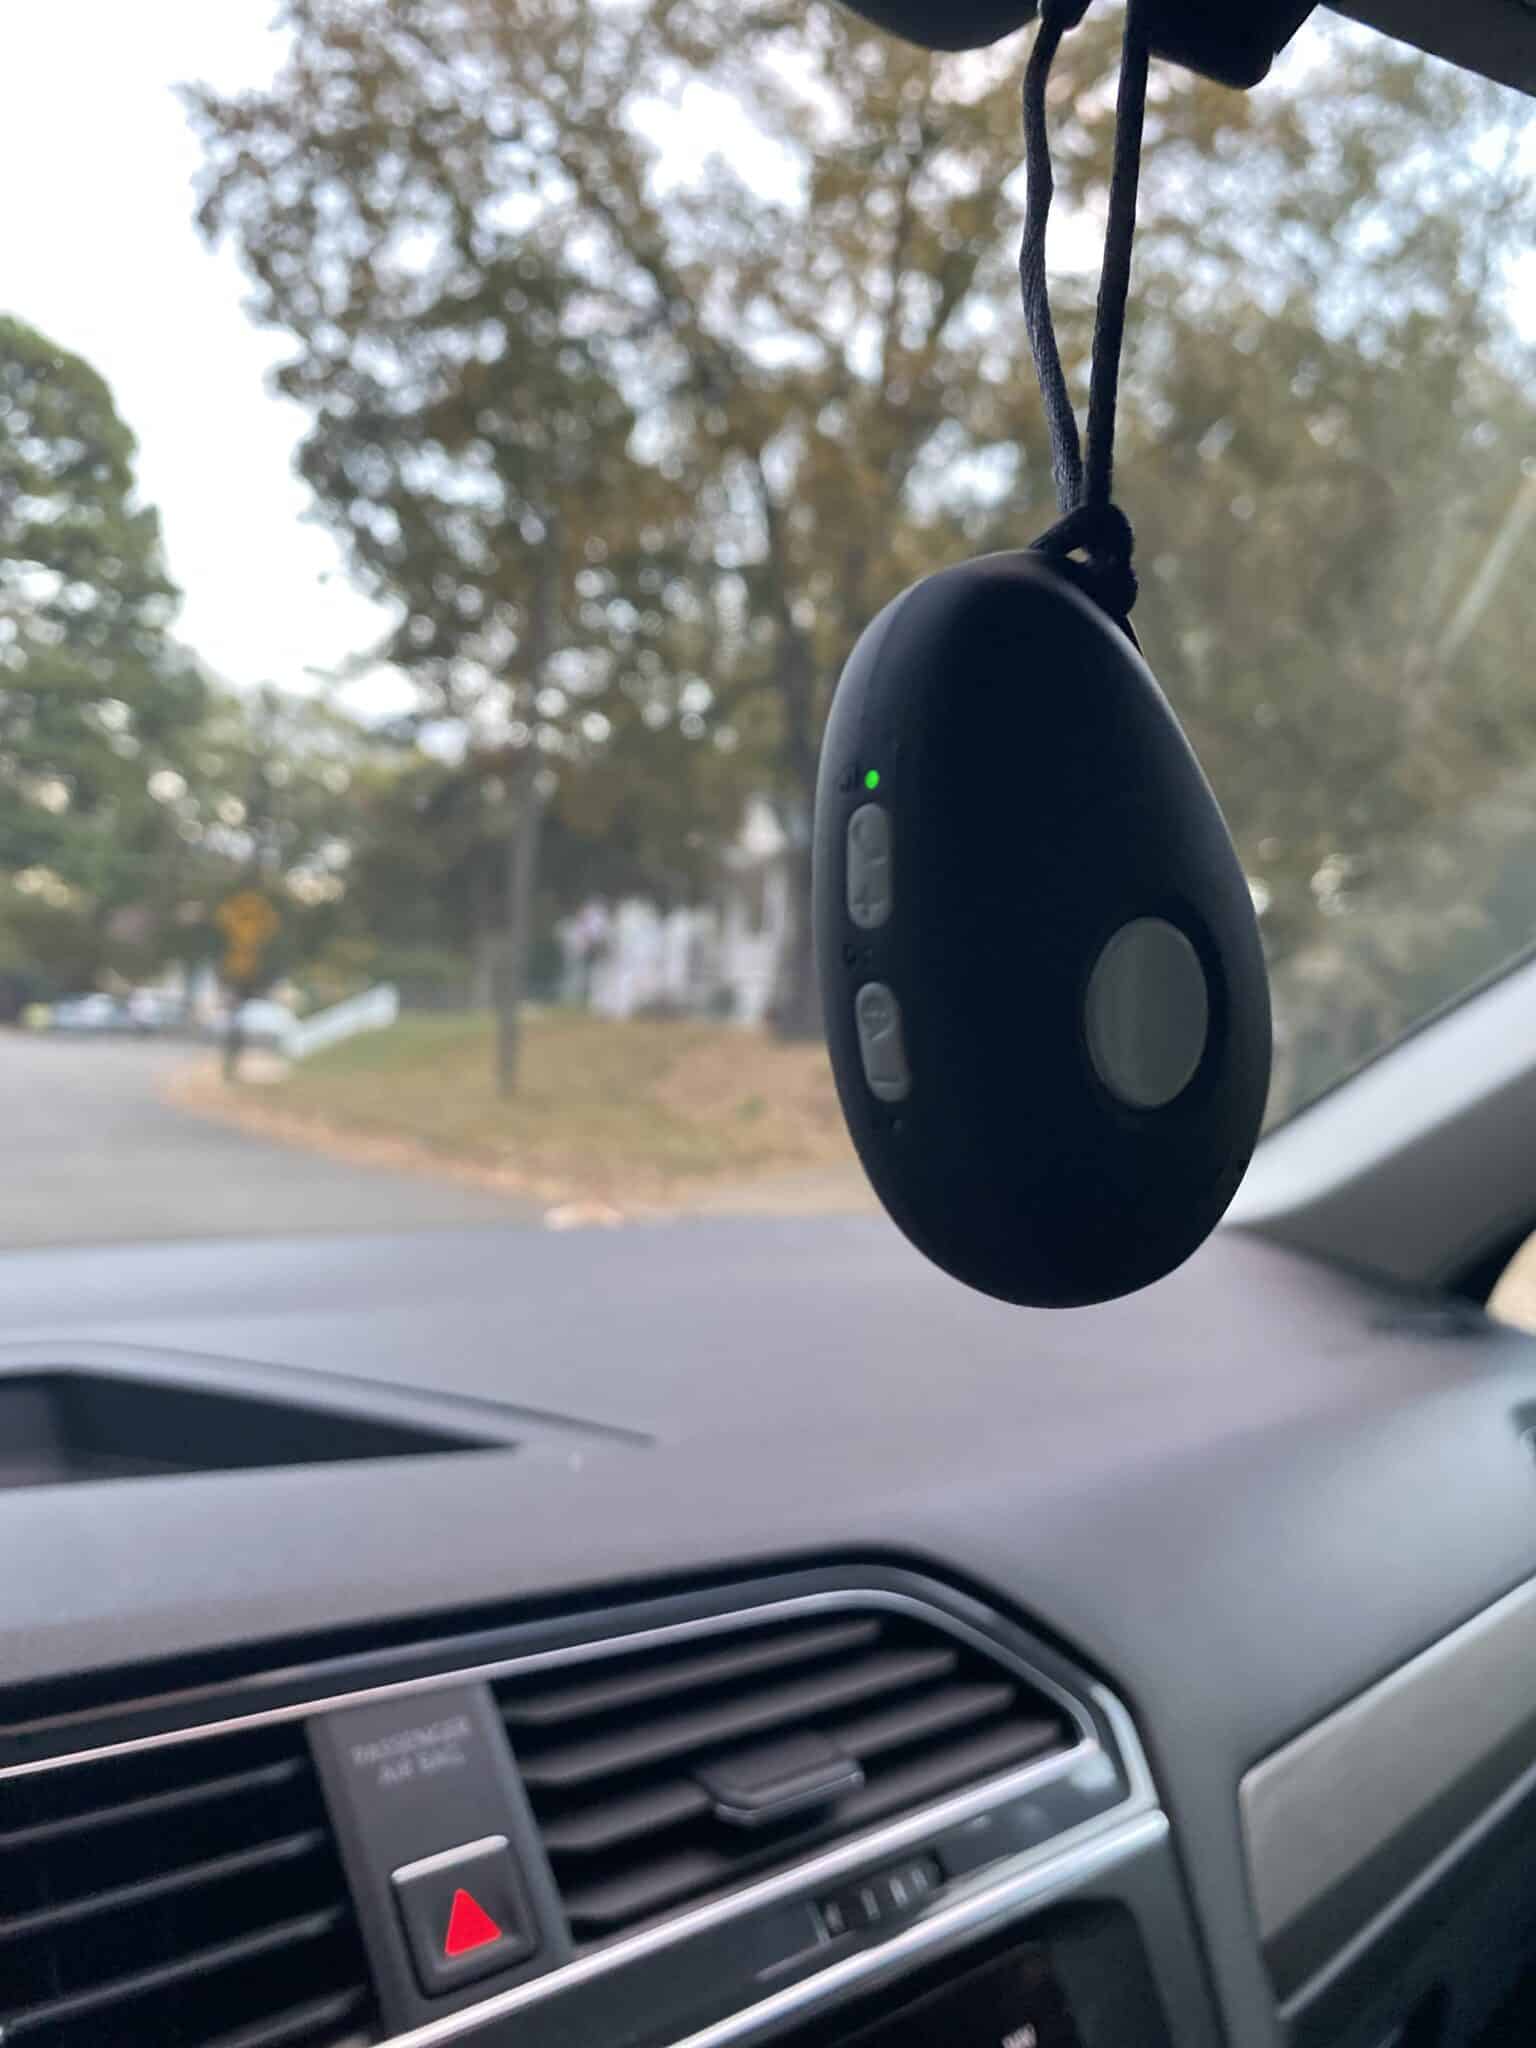 A mobile medical alert system hanging from the rearview mirror during a field test.